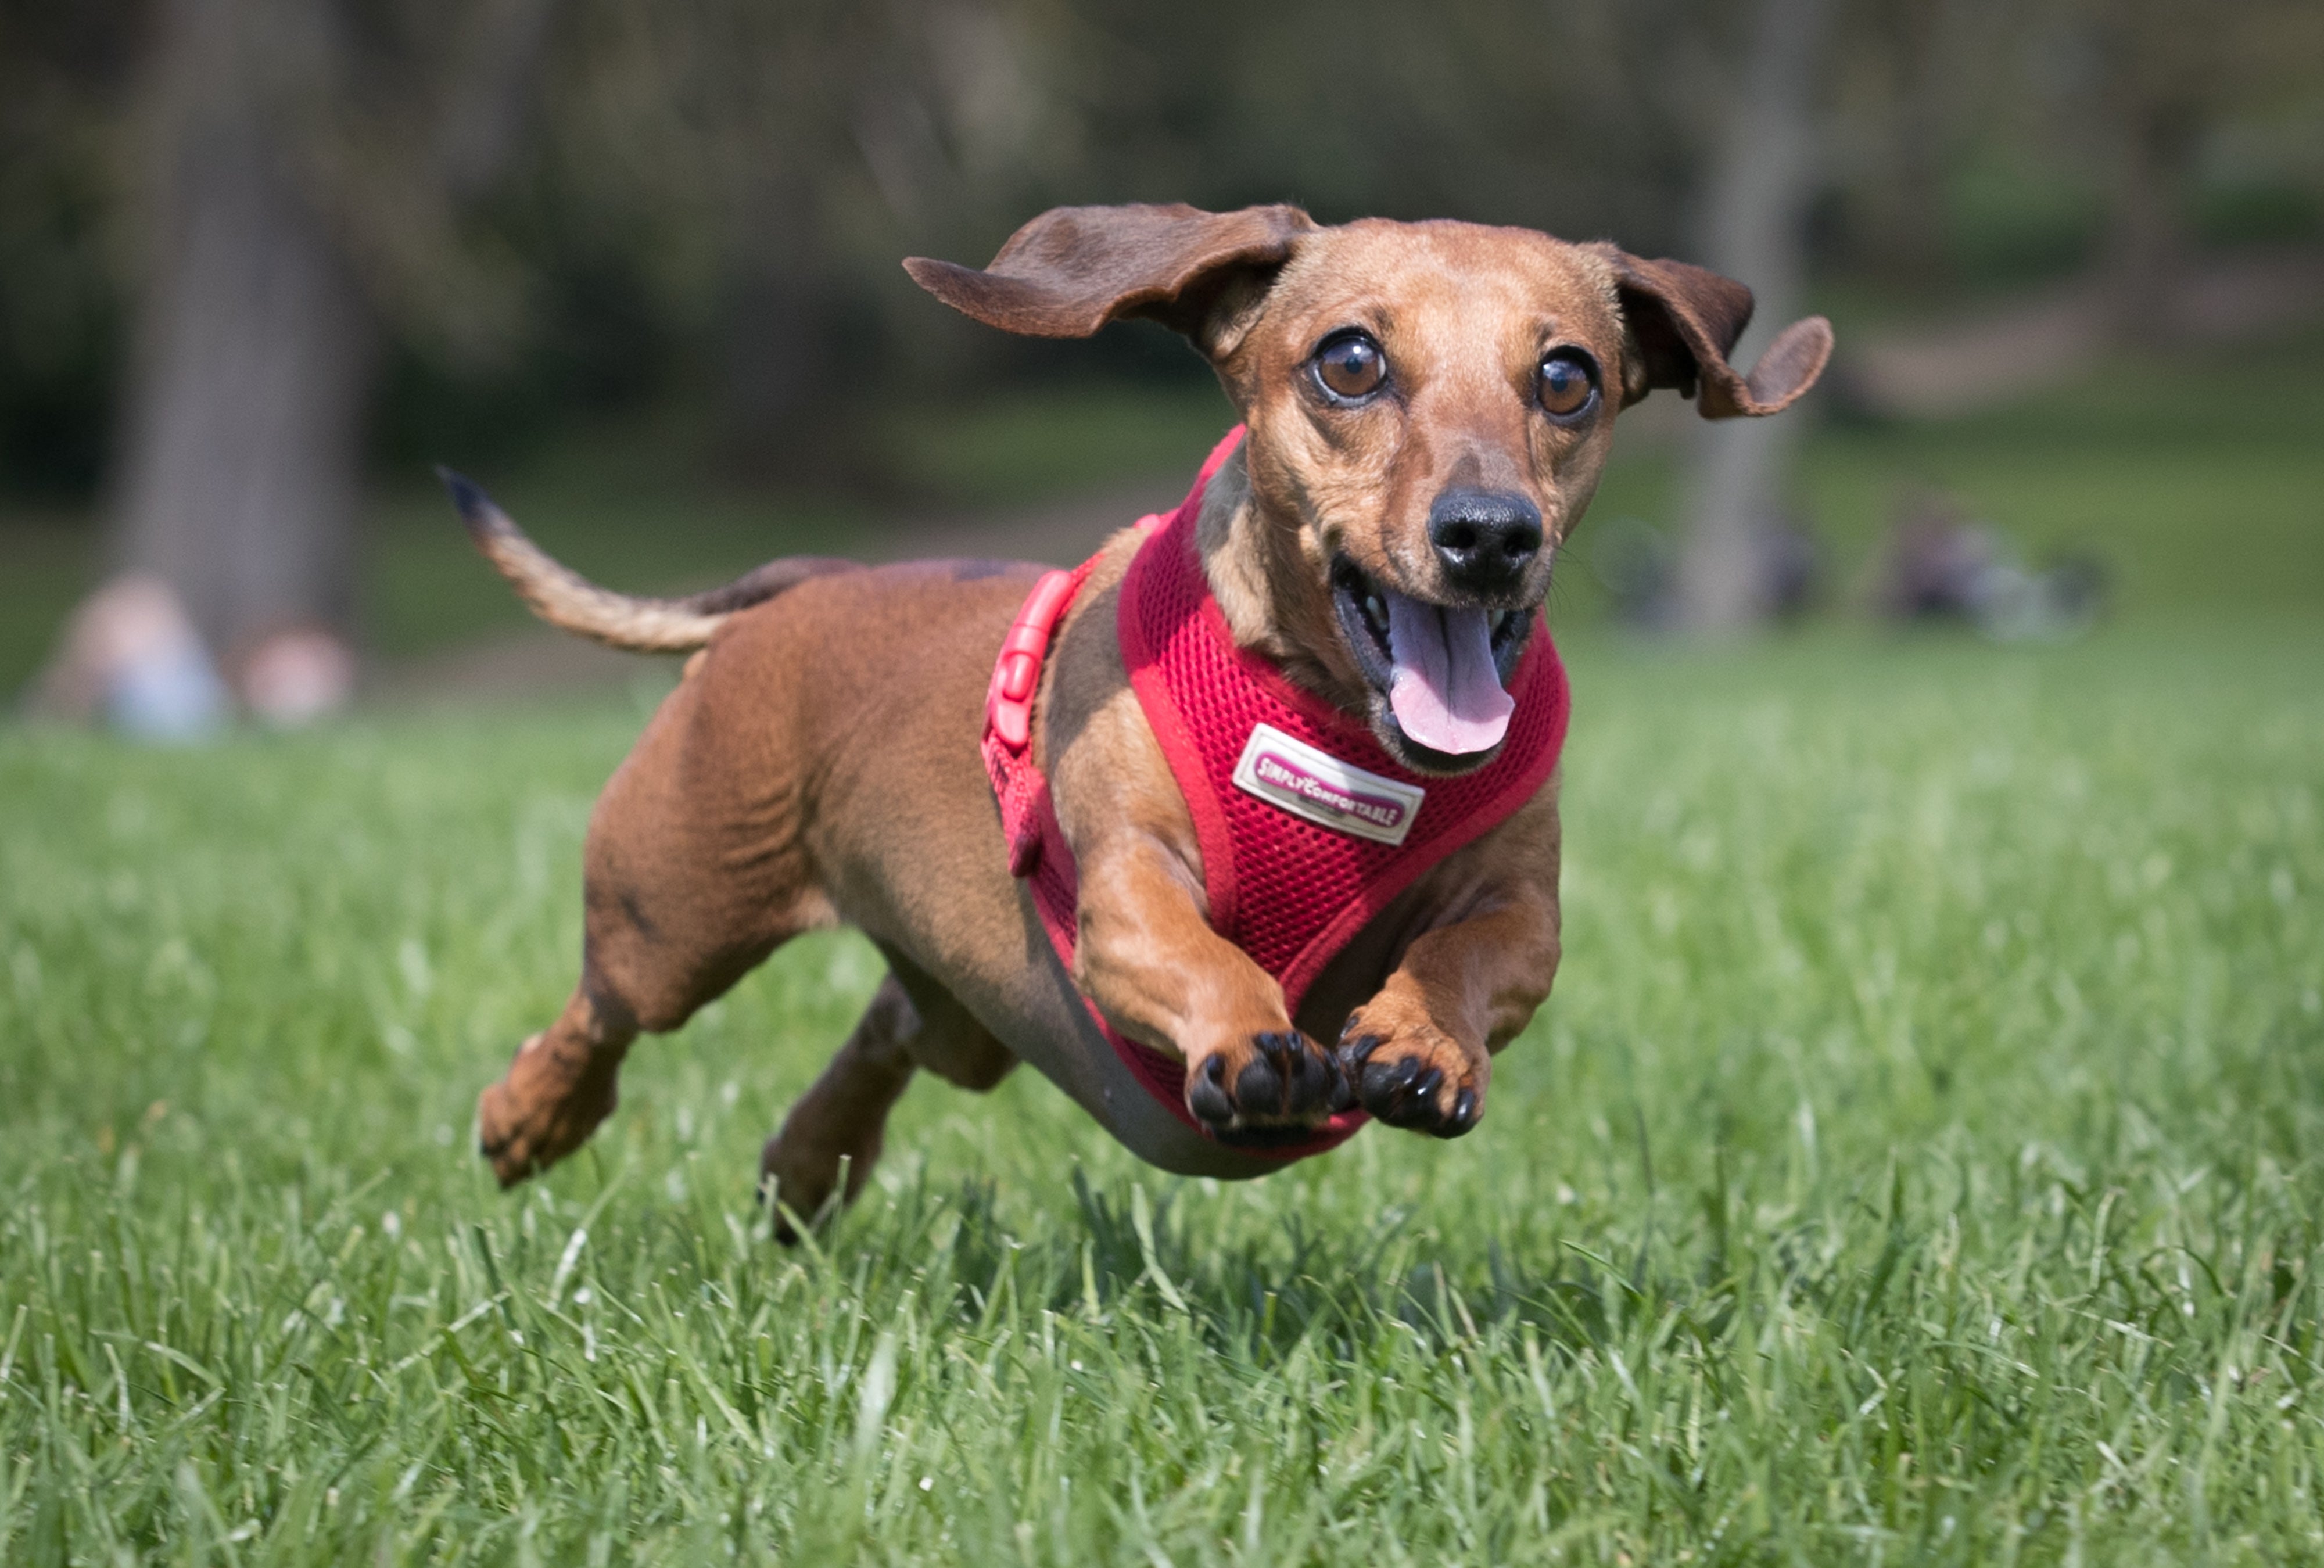 The Kennel Club has tightened its rules on breeding dachshunds